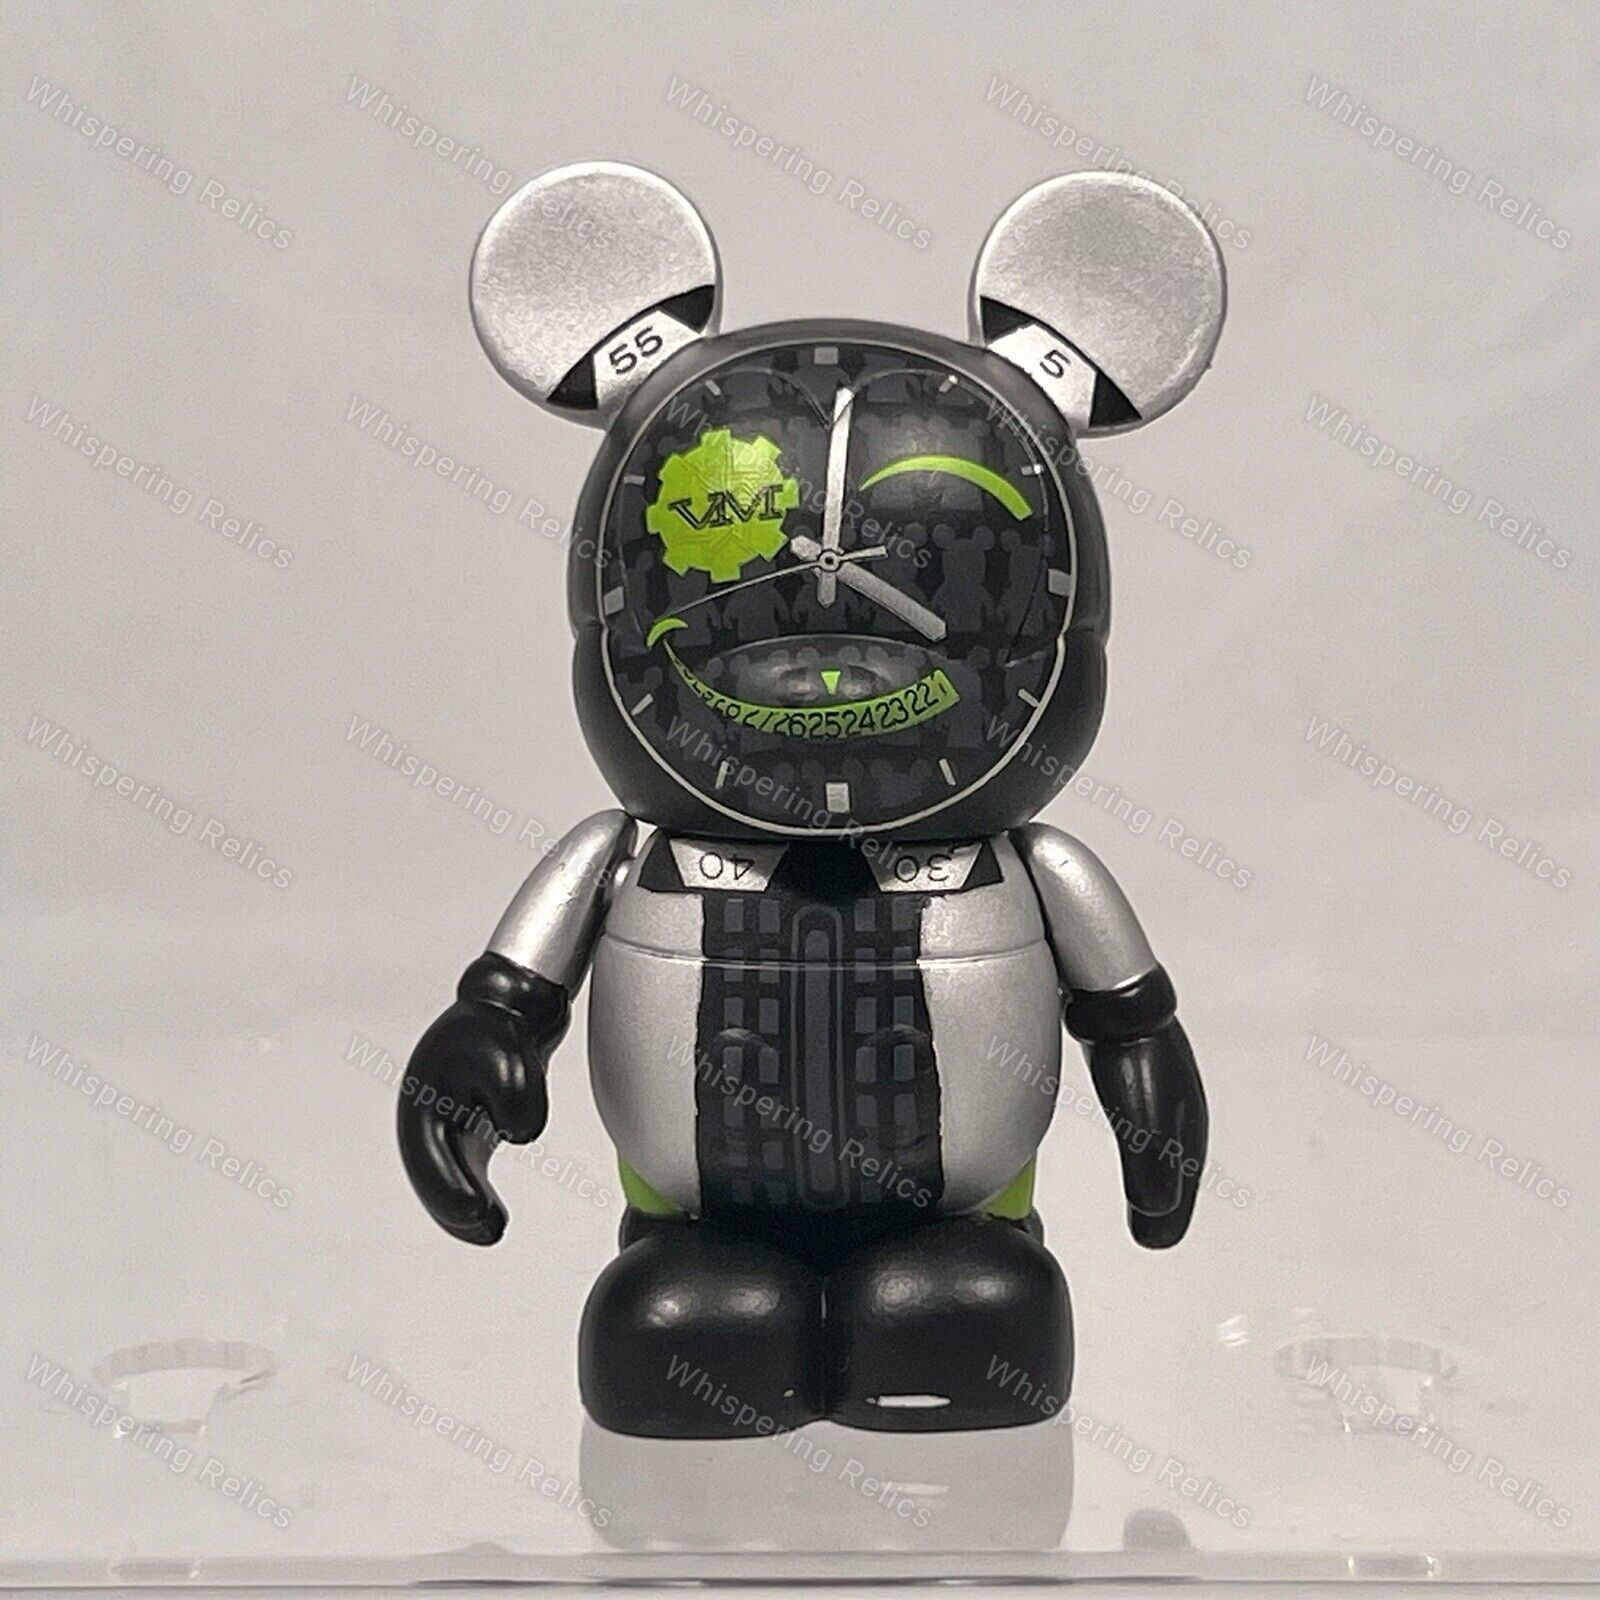 Vinylmation Urban Series 3” Figure and Watch | LE 750 HTF & RARE